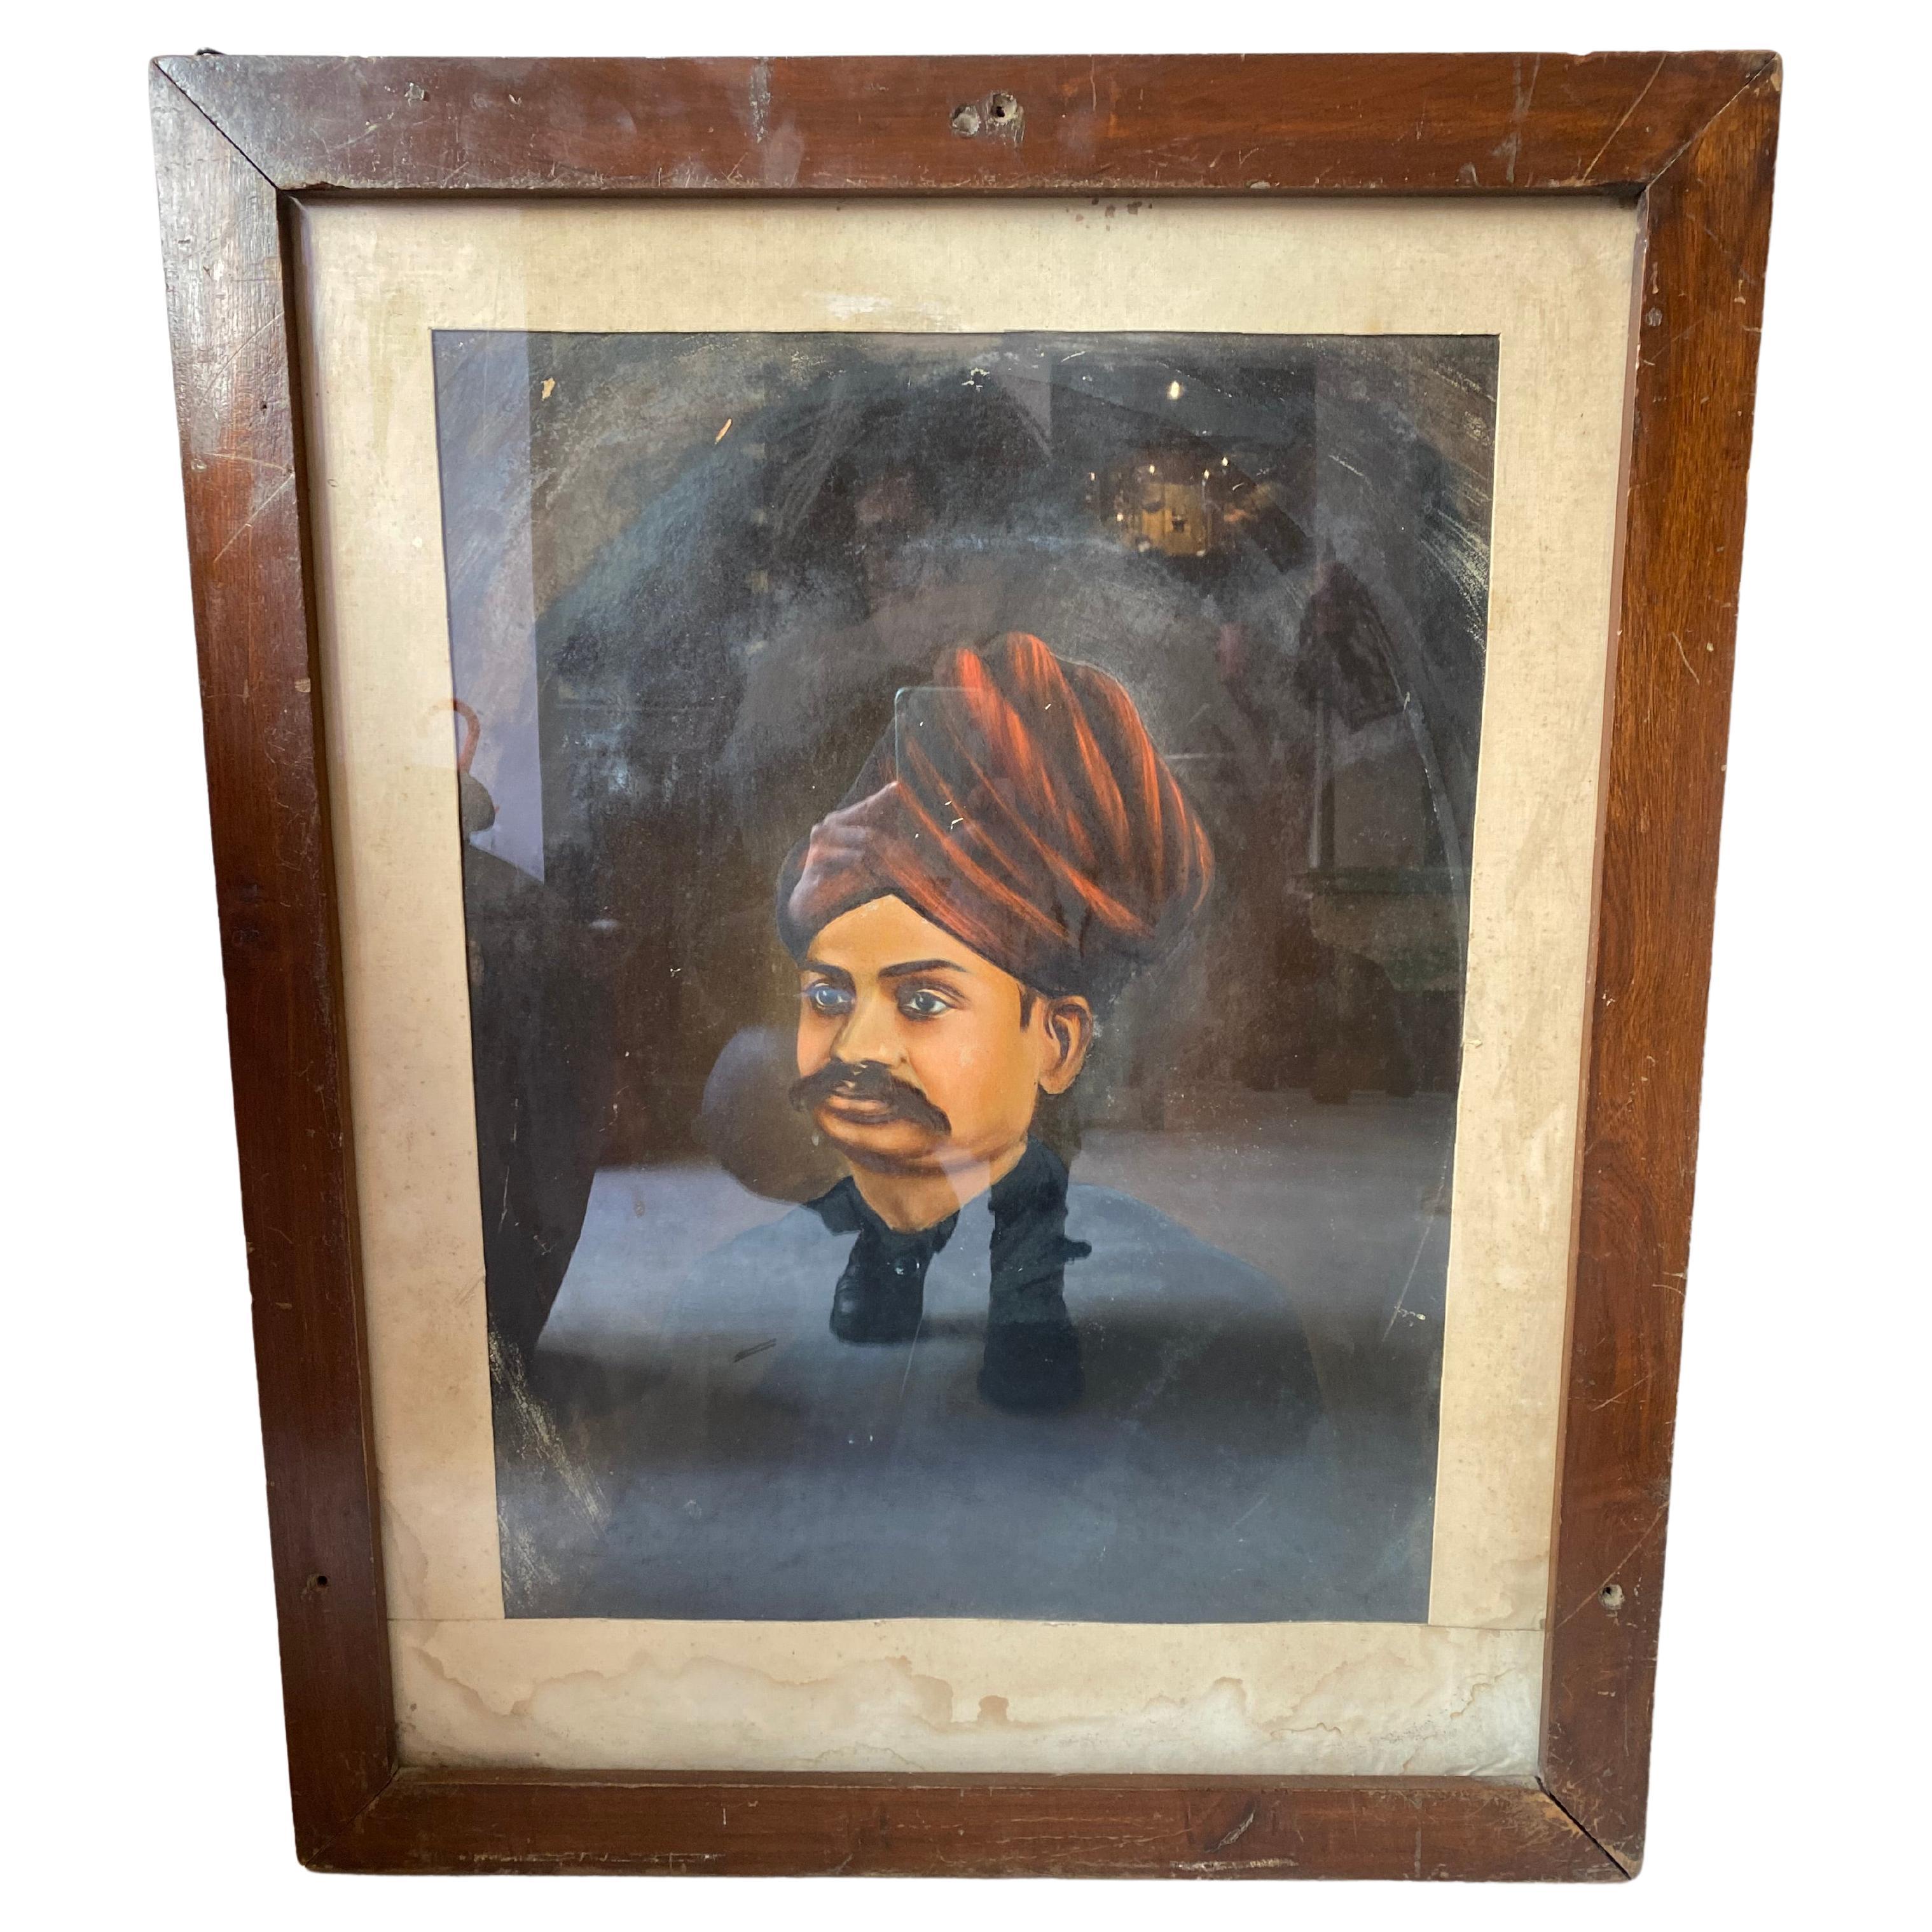 Vintage Portrait of an Indian donor